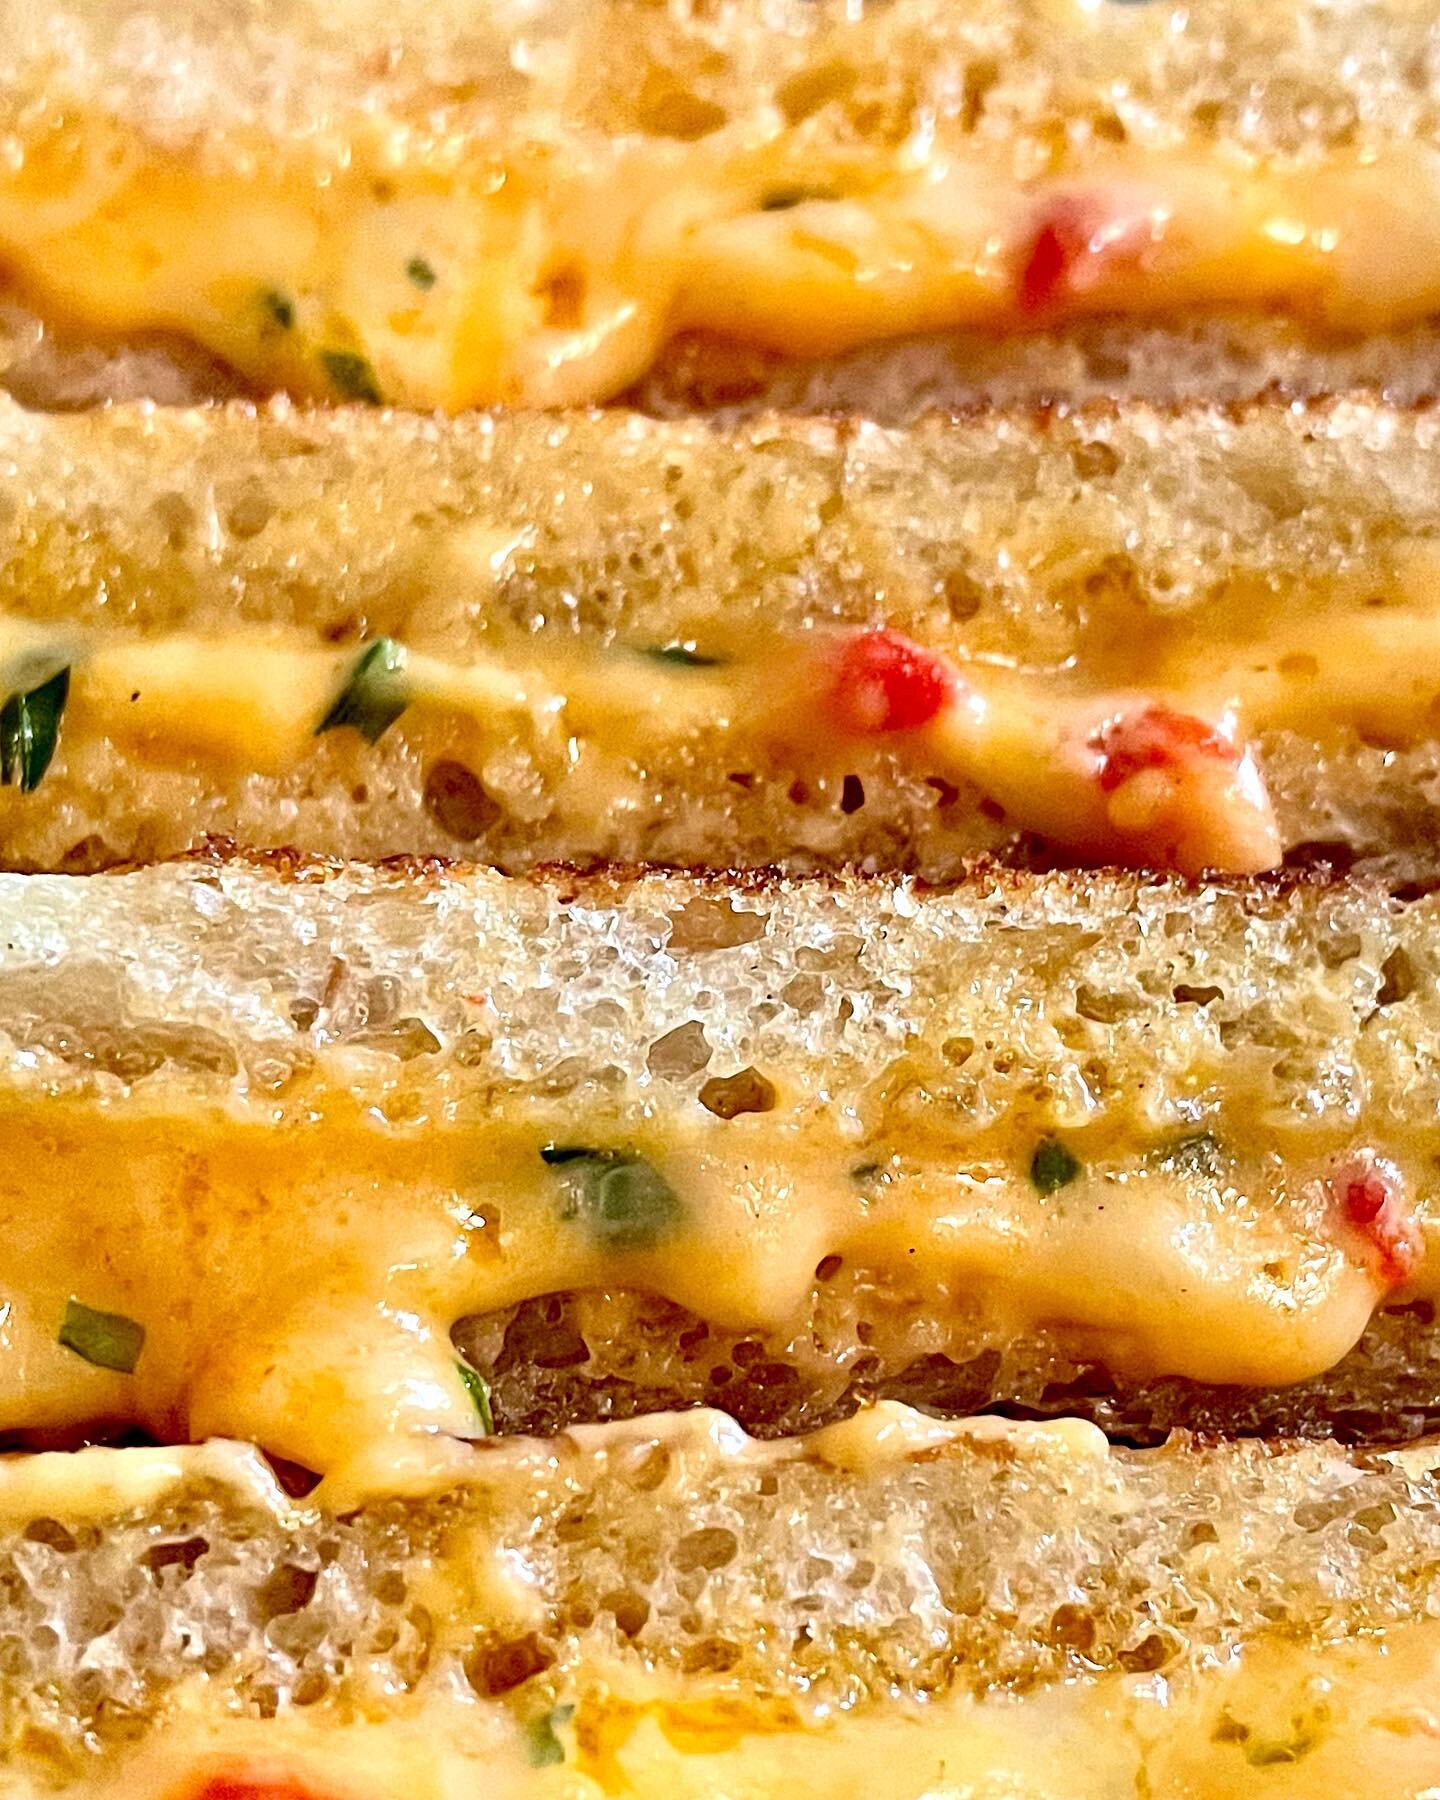 I&rsquo;ll just leave this right here  #grilledcheese #pimentochzclub